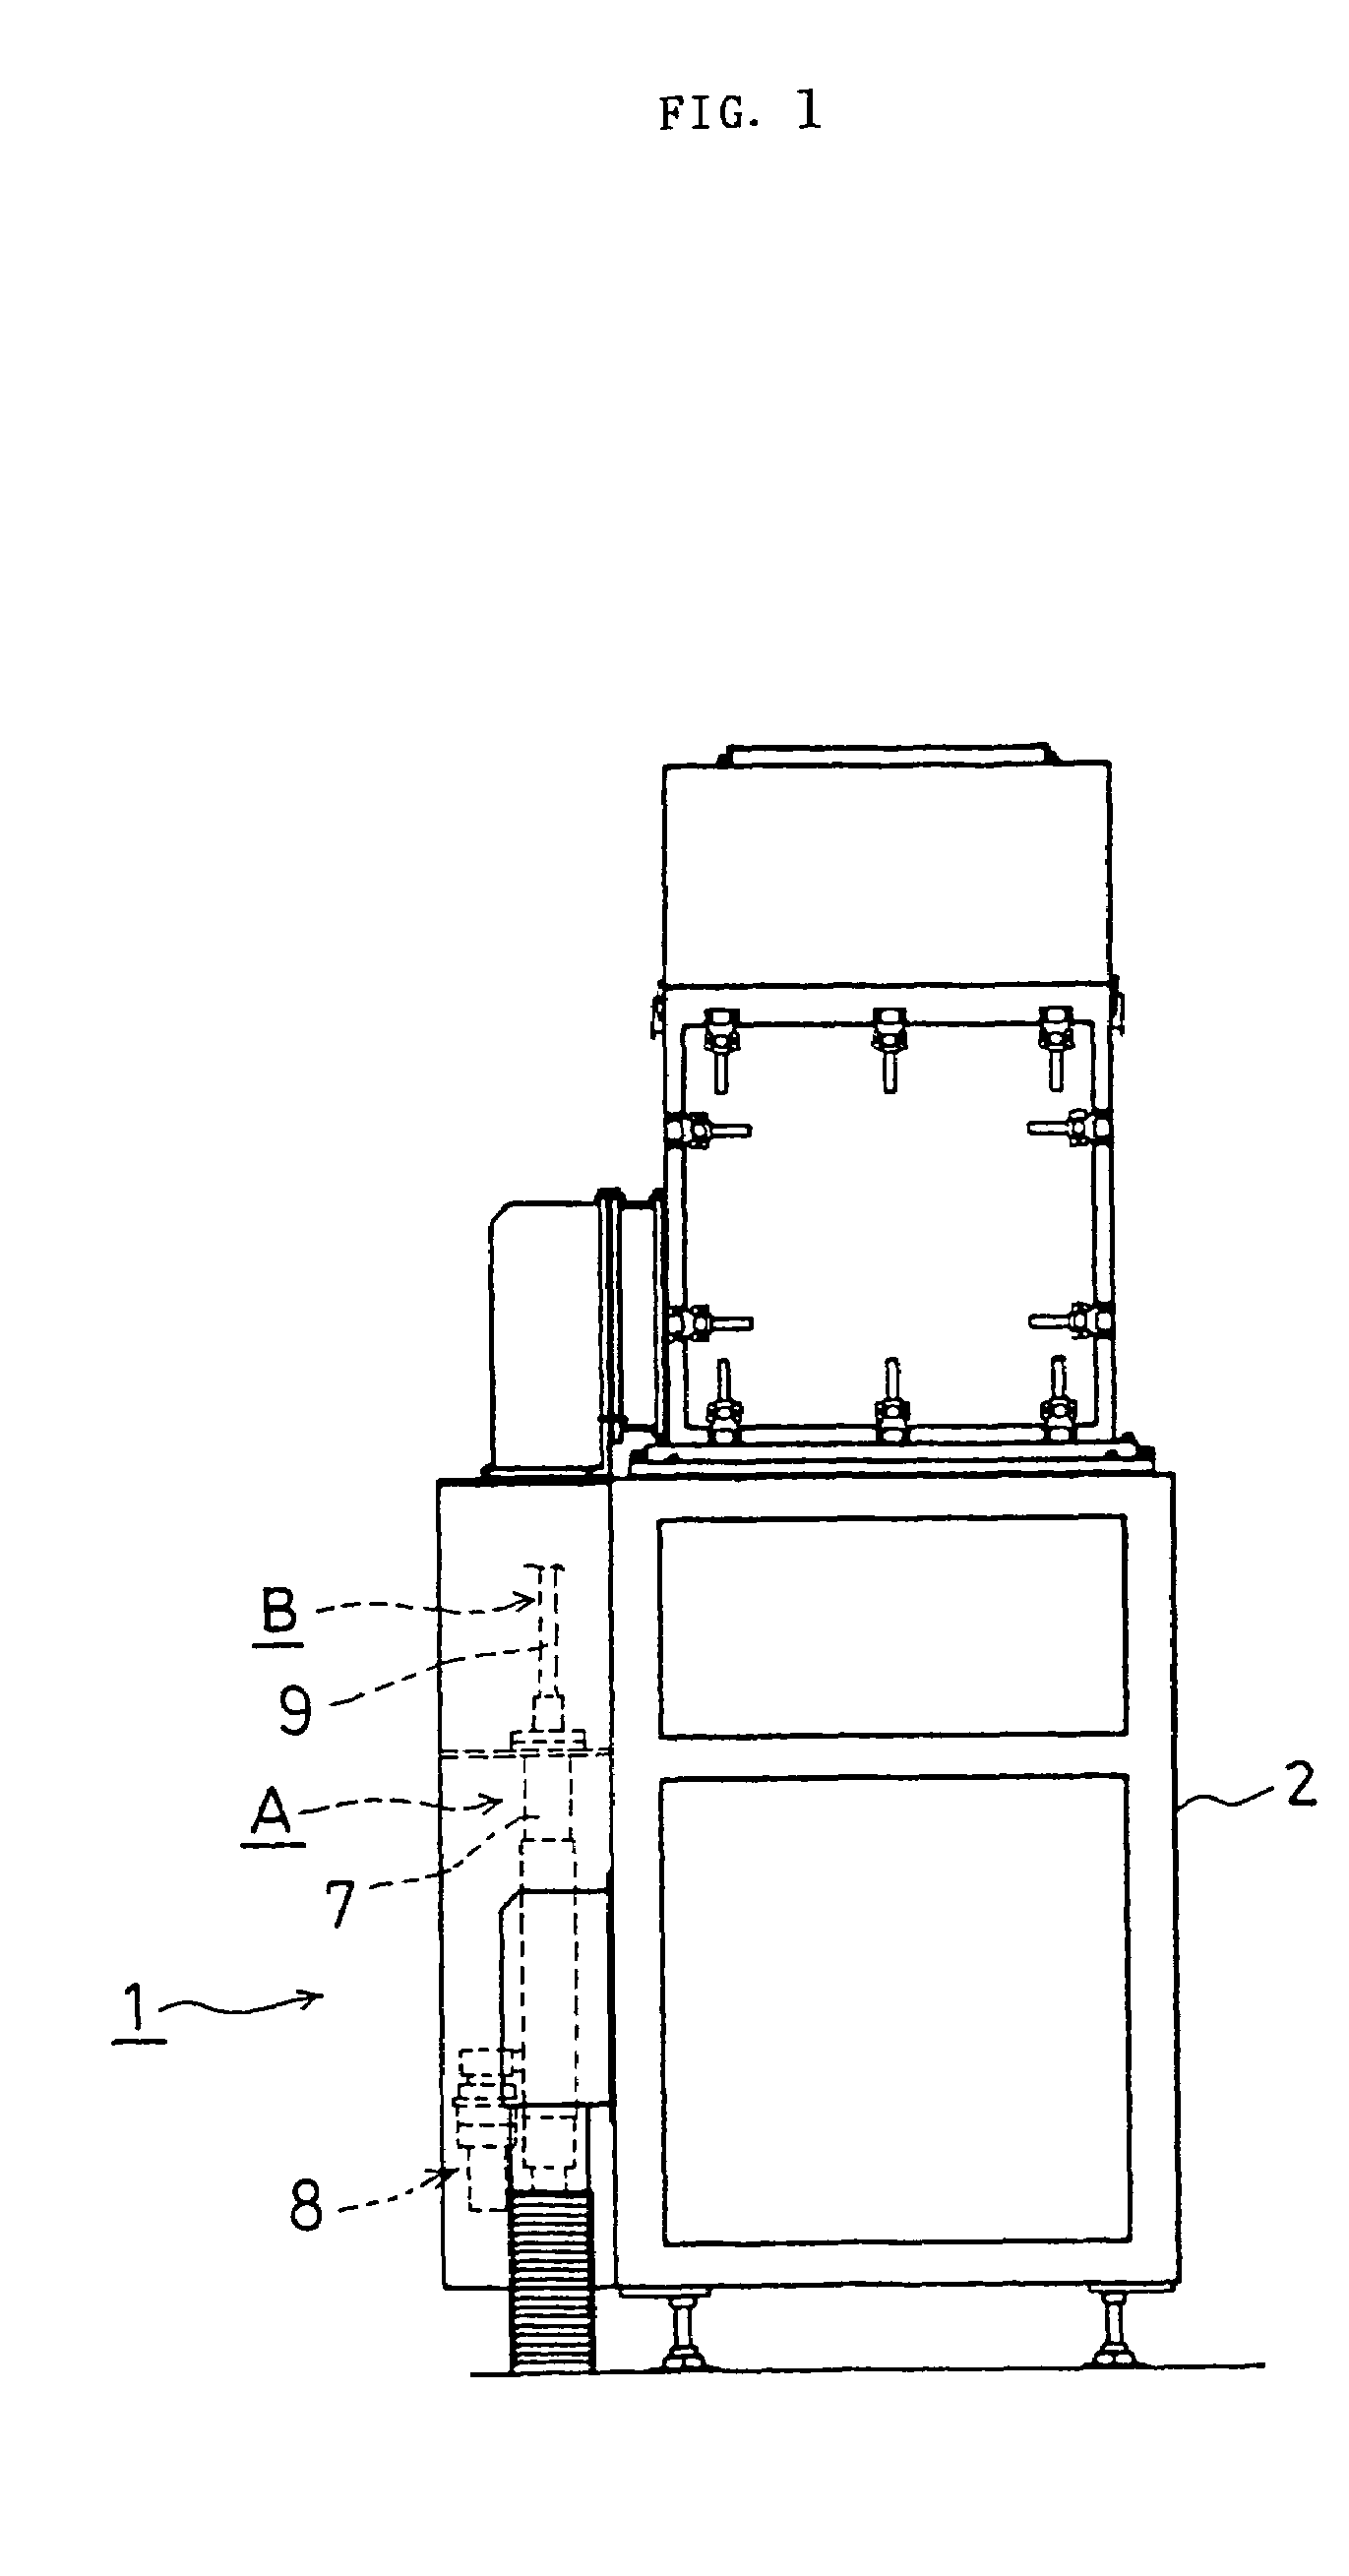 Rotary silicon wafer cleaning apparatus